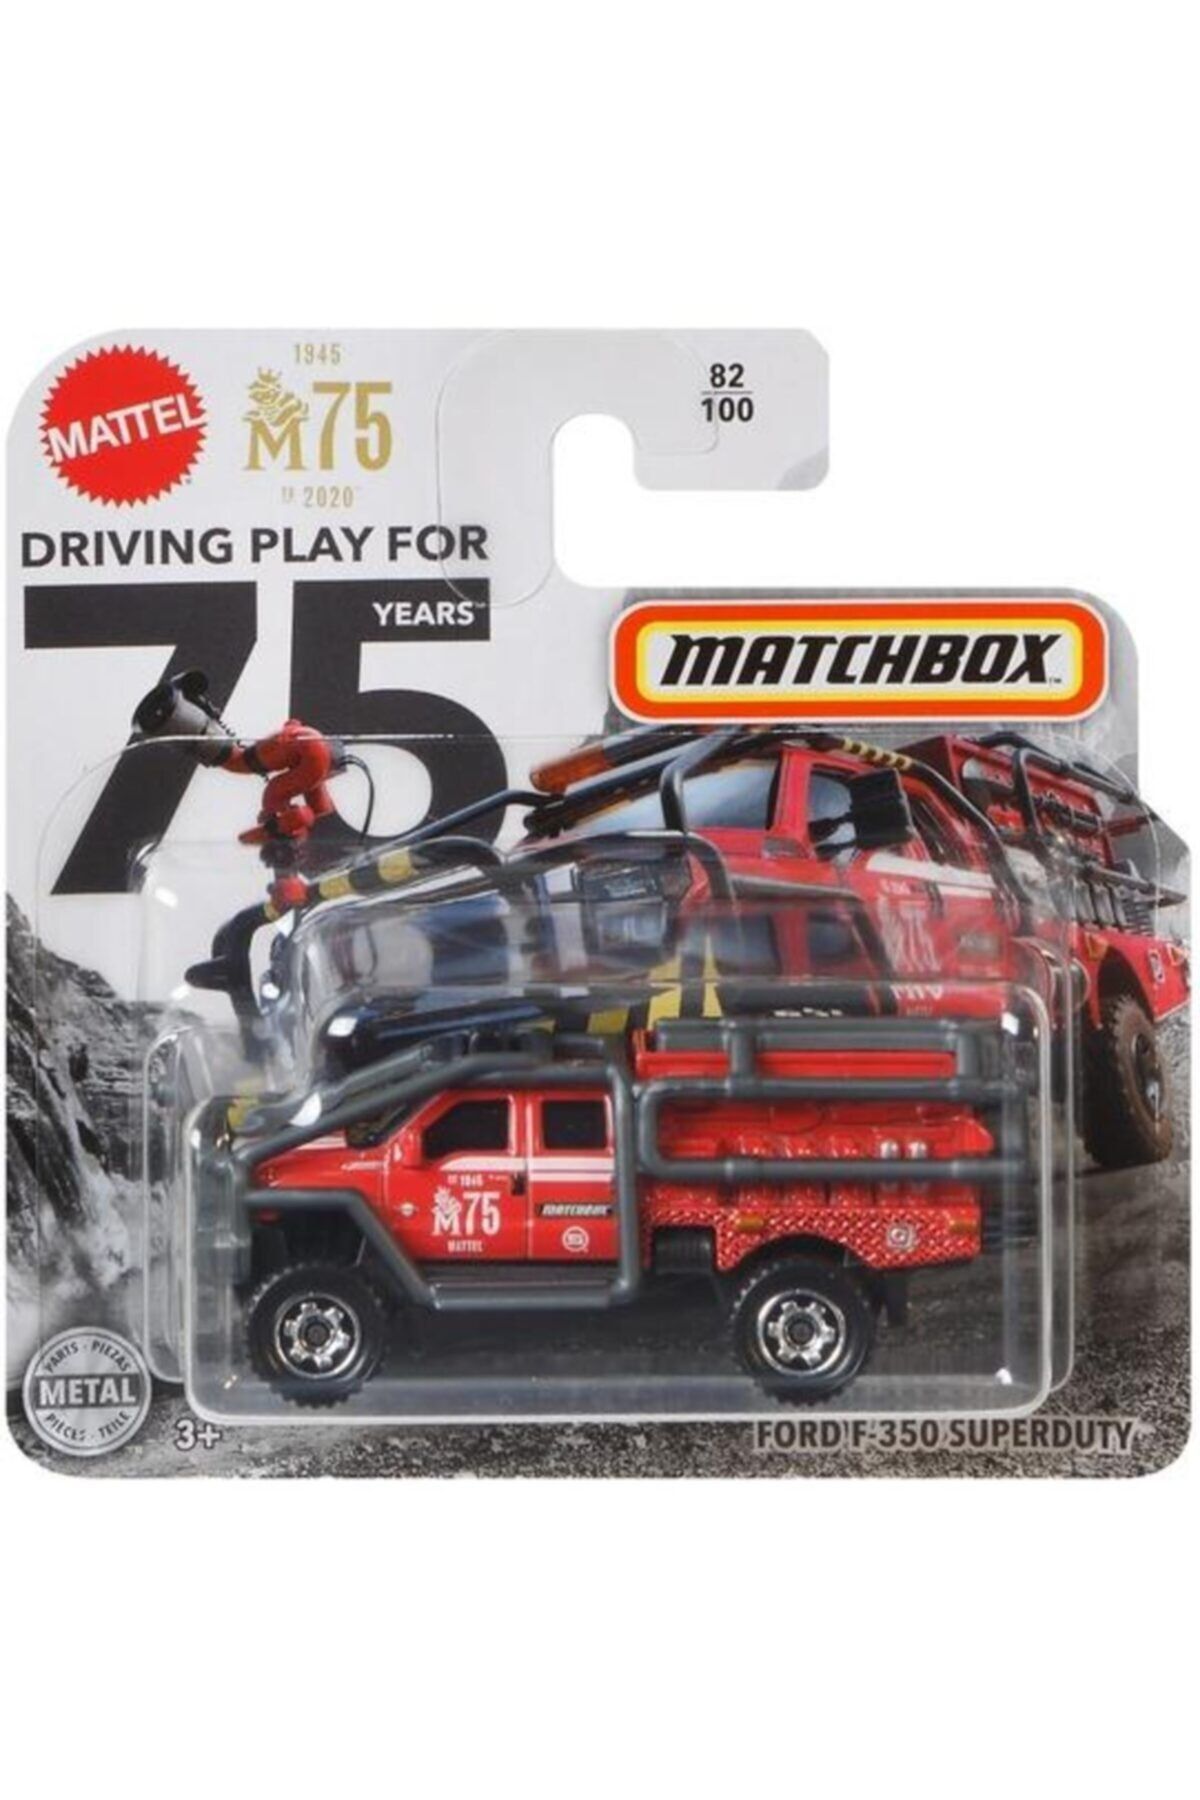 Matchbox C0859 Driving Play For 75 Years Ford F-350 Superduty Gkl08